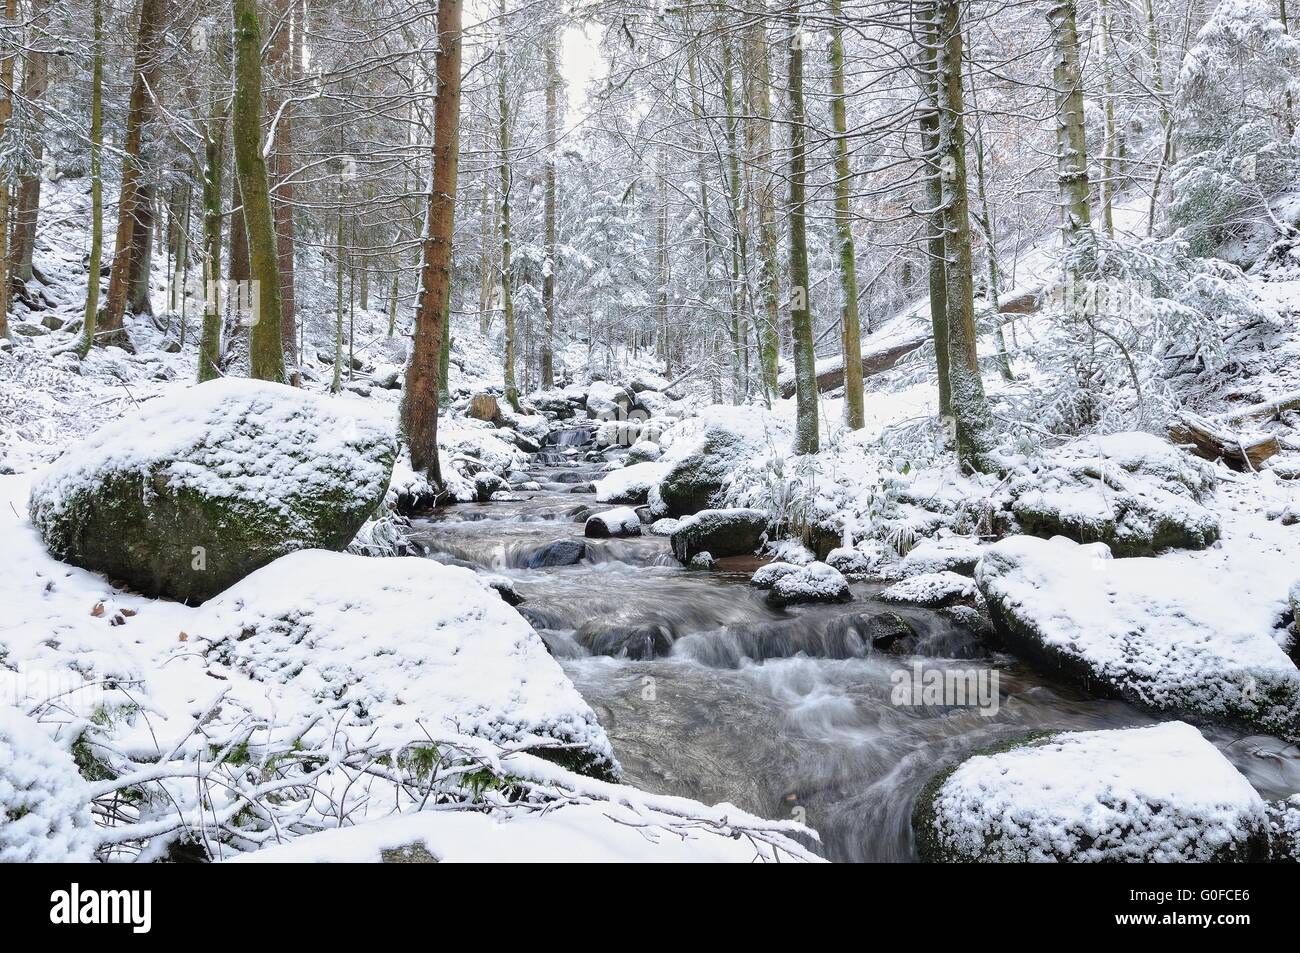 in wintry Gertelbach in Bühlertal Black Forest Germany Stock Photo